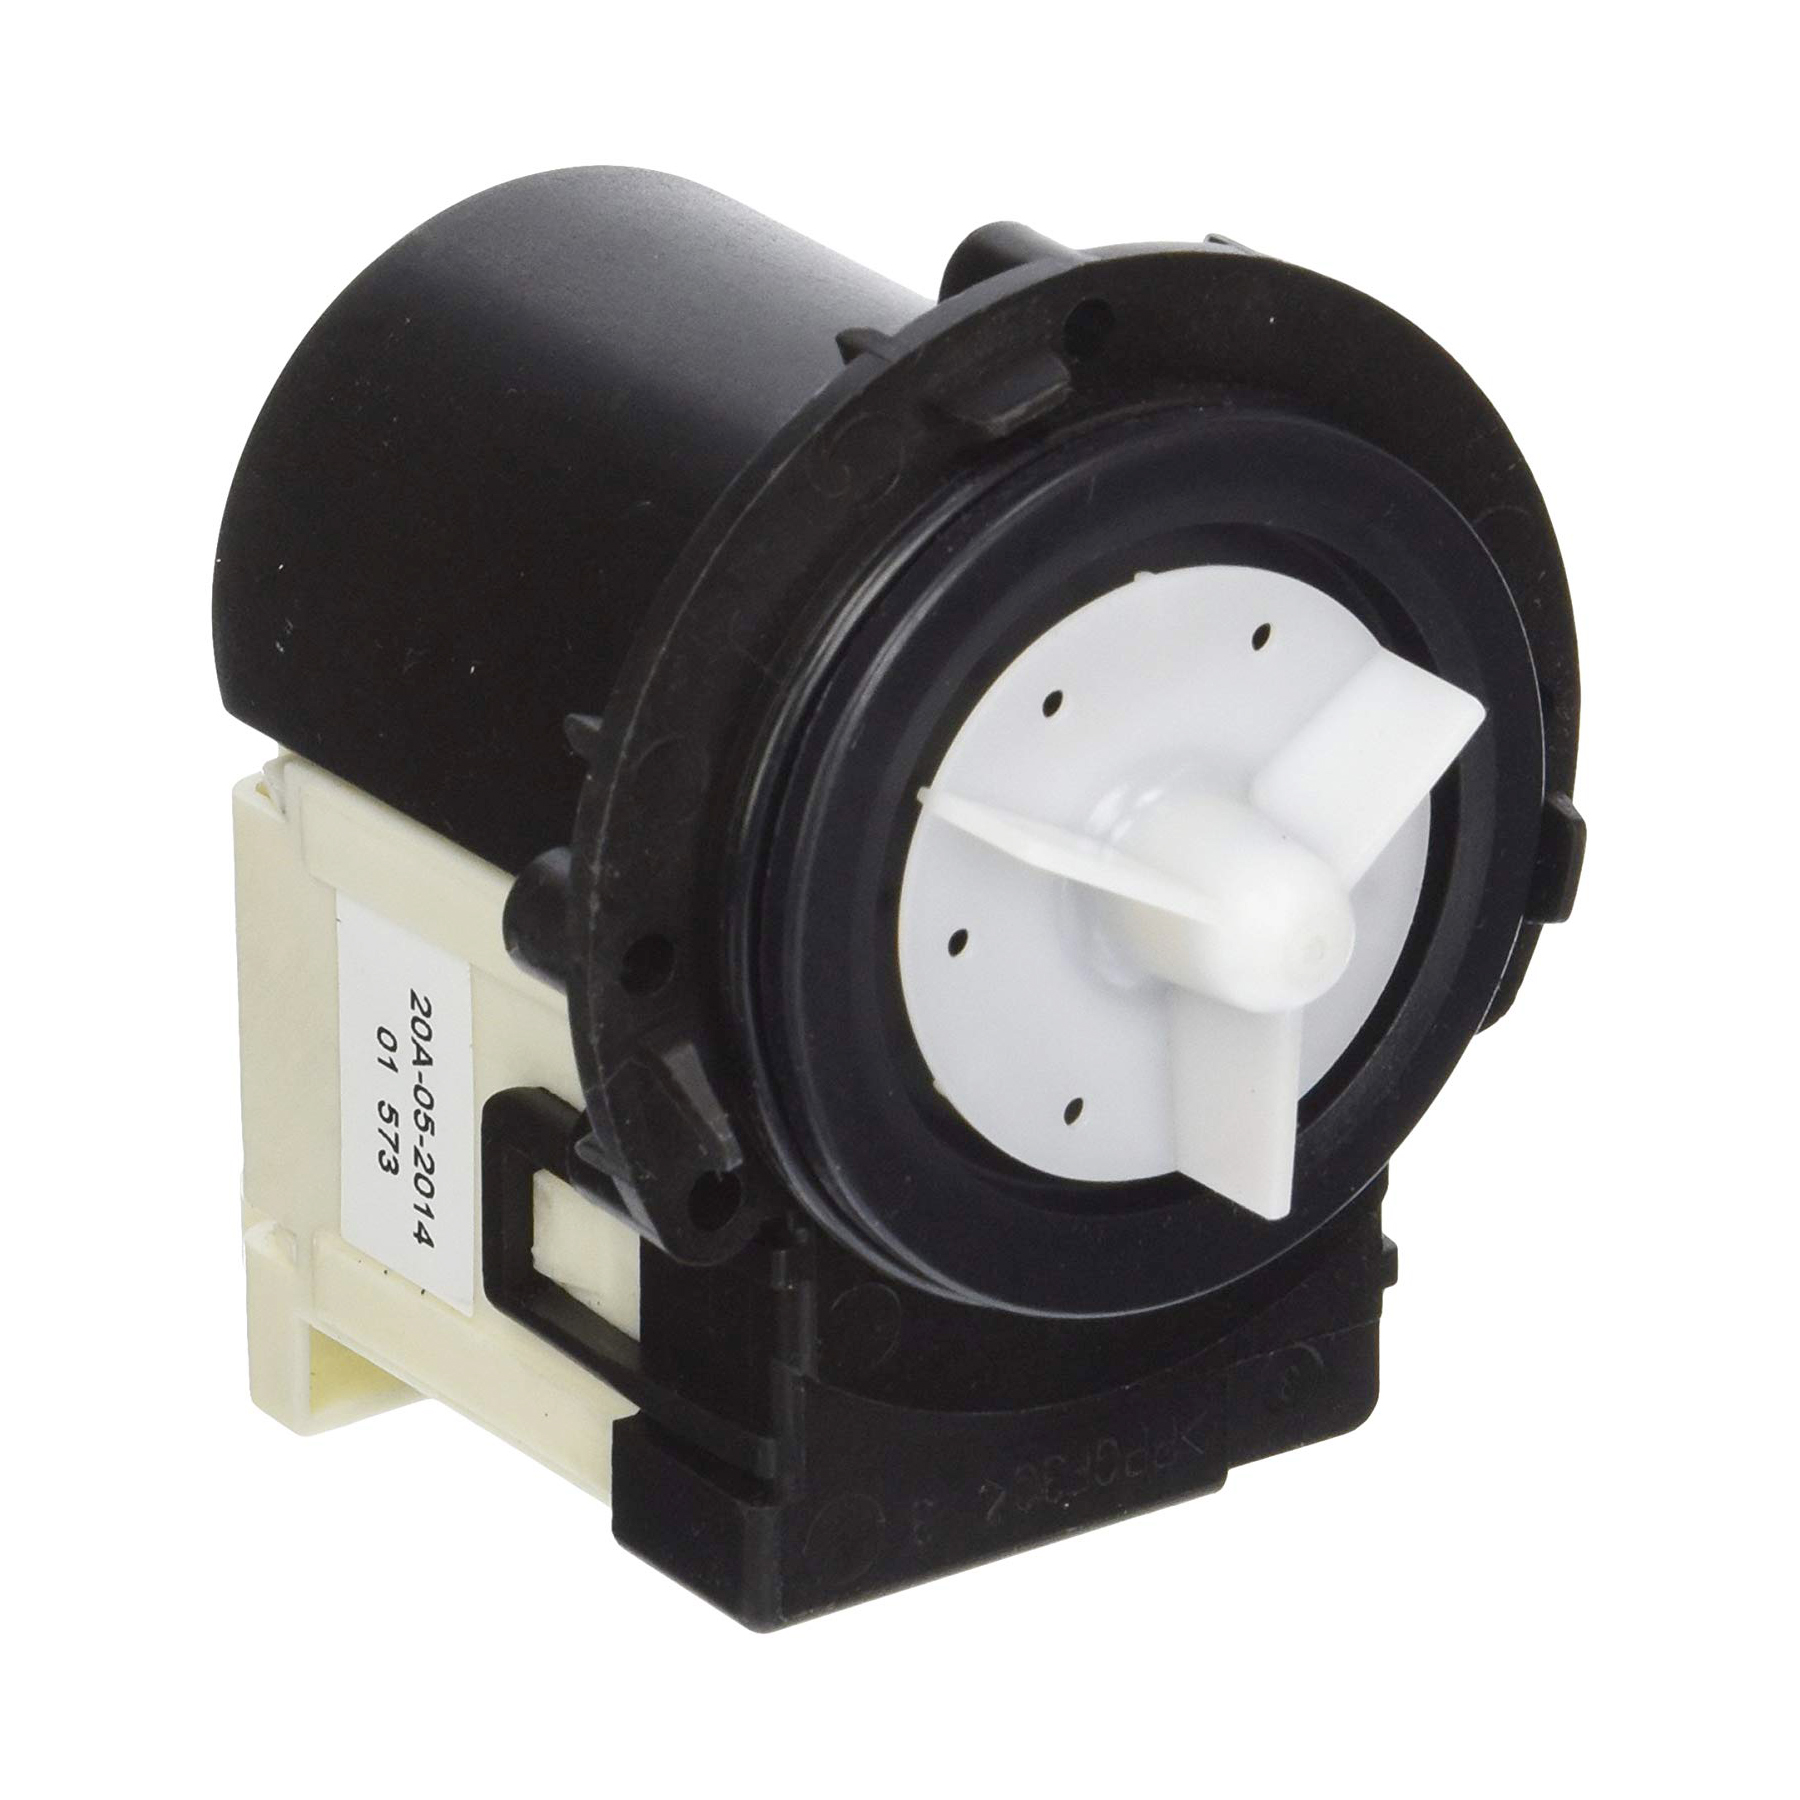 Details about   Replacement Water Drain Pump Motor Assembly for LG Washer WM2233HD WM2233HS 